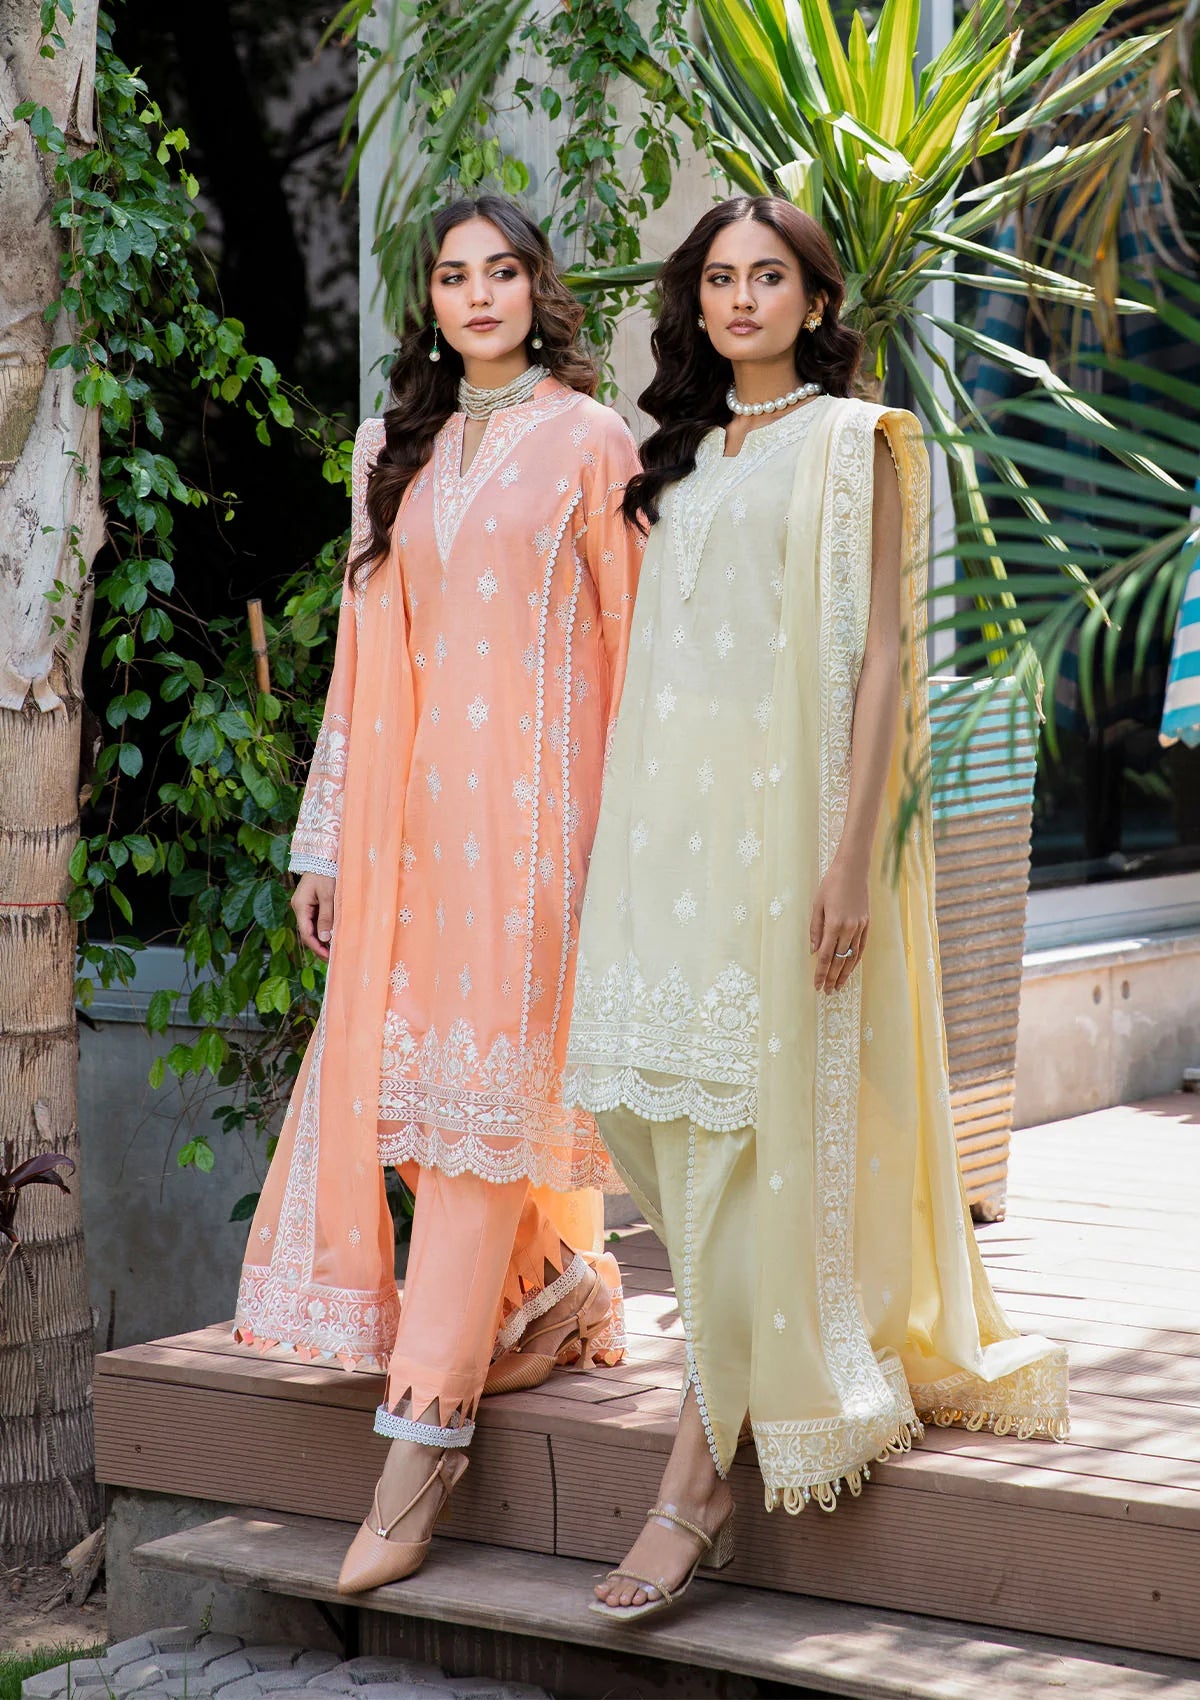 Buy Now, LOOK 3B - AIK Lawn'23 - Vol. 2 - Shahana Collection UK - Wedding and Bridal Party Dresses - Aik Atelier 